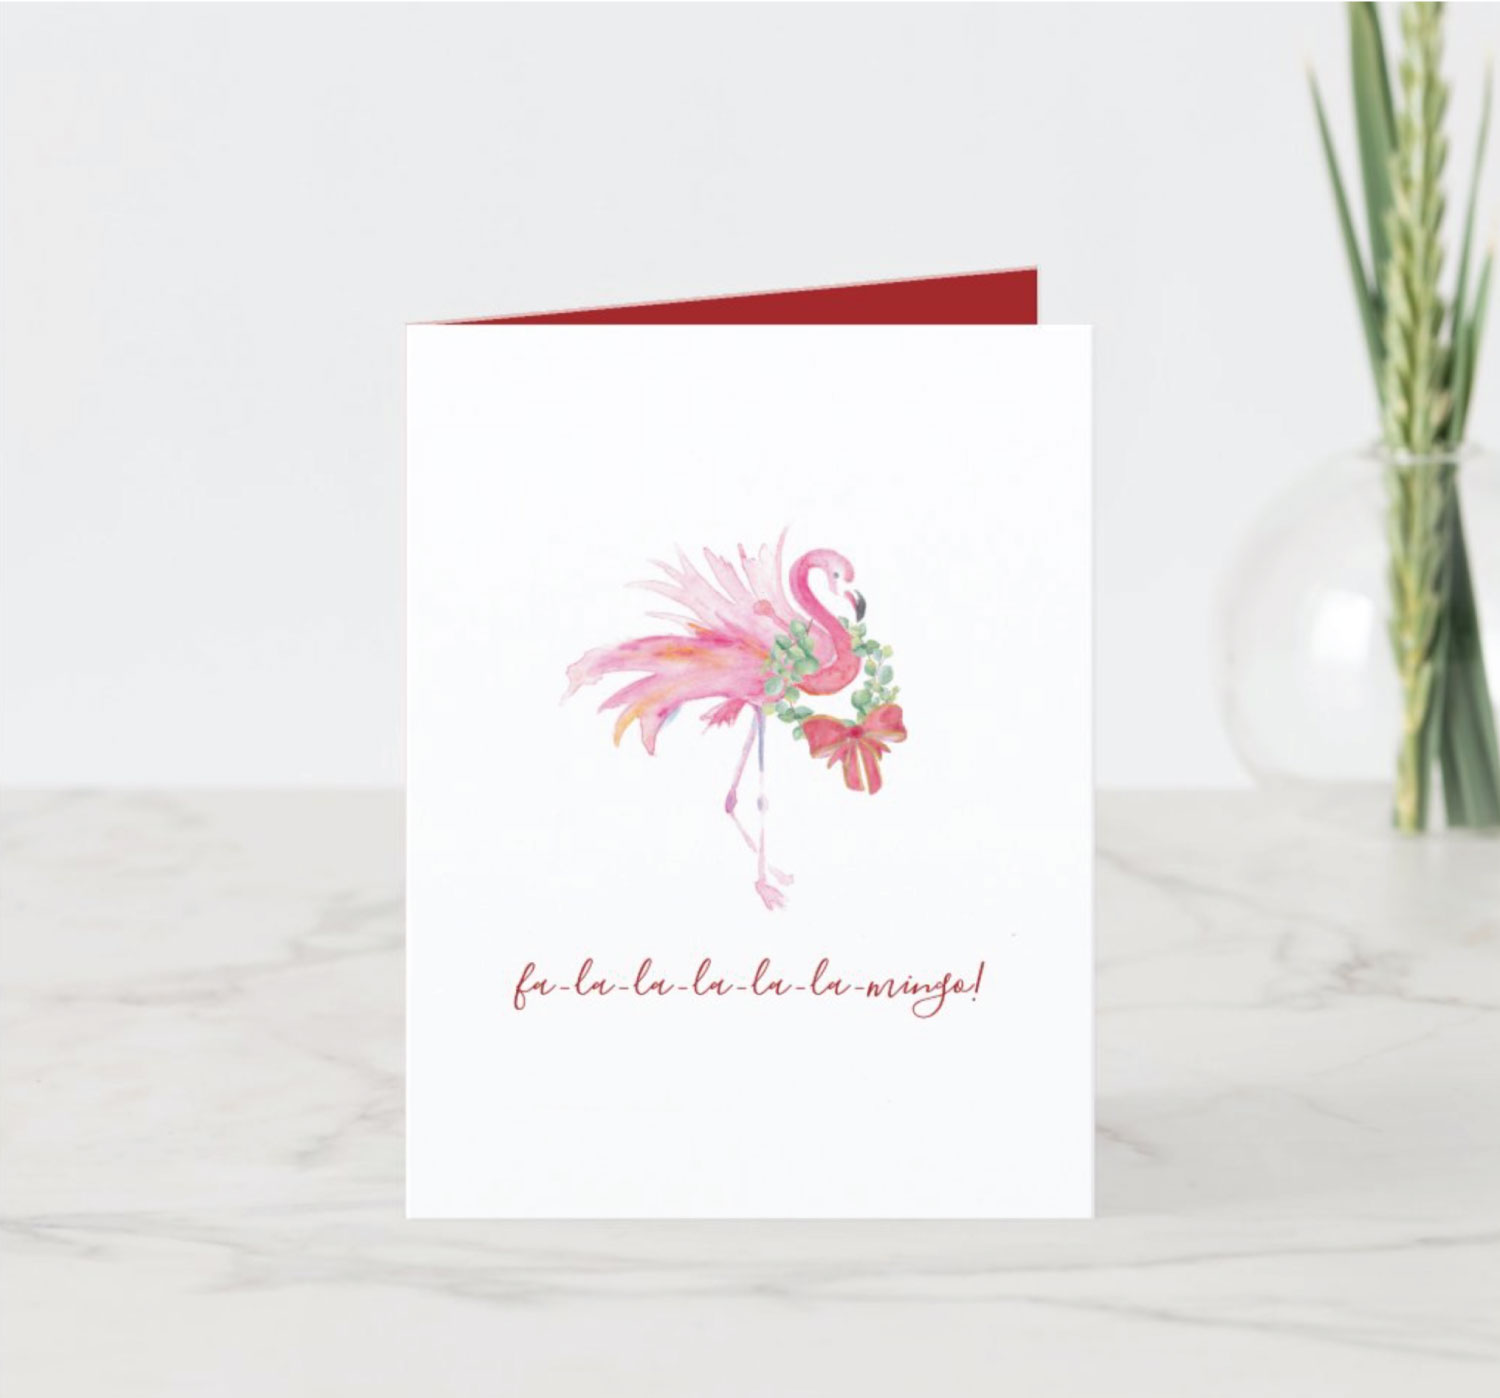 Shop my line of tropical inspired Christmas Cards featuring my original watercolor art for a Palm Beach inspired holiday